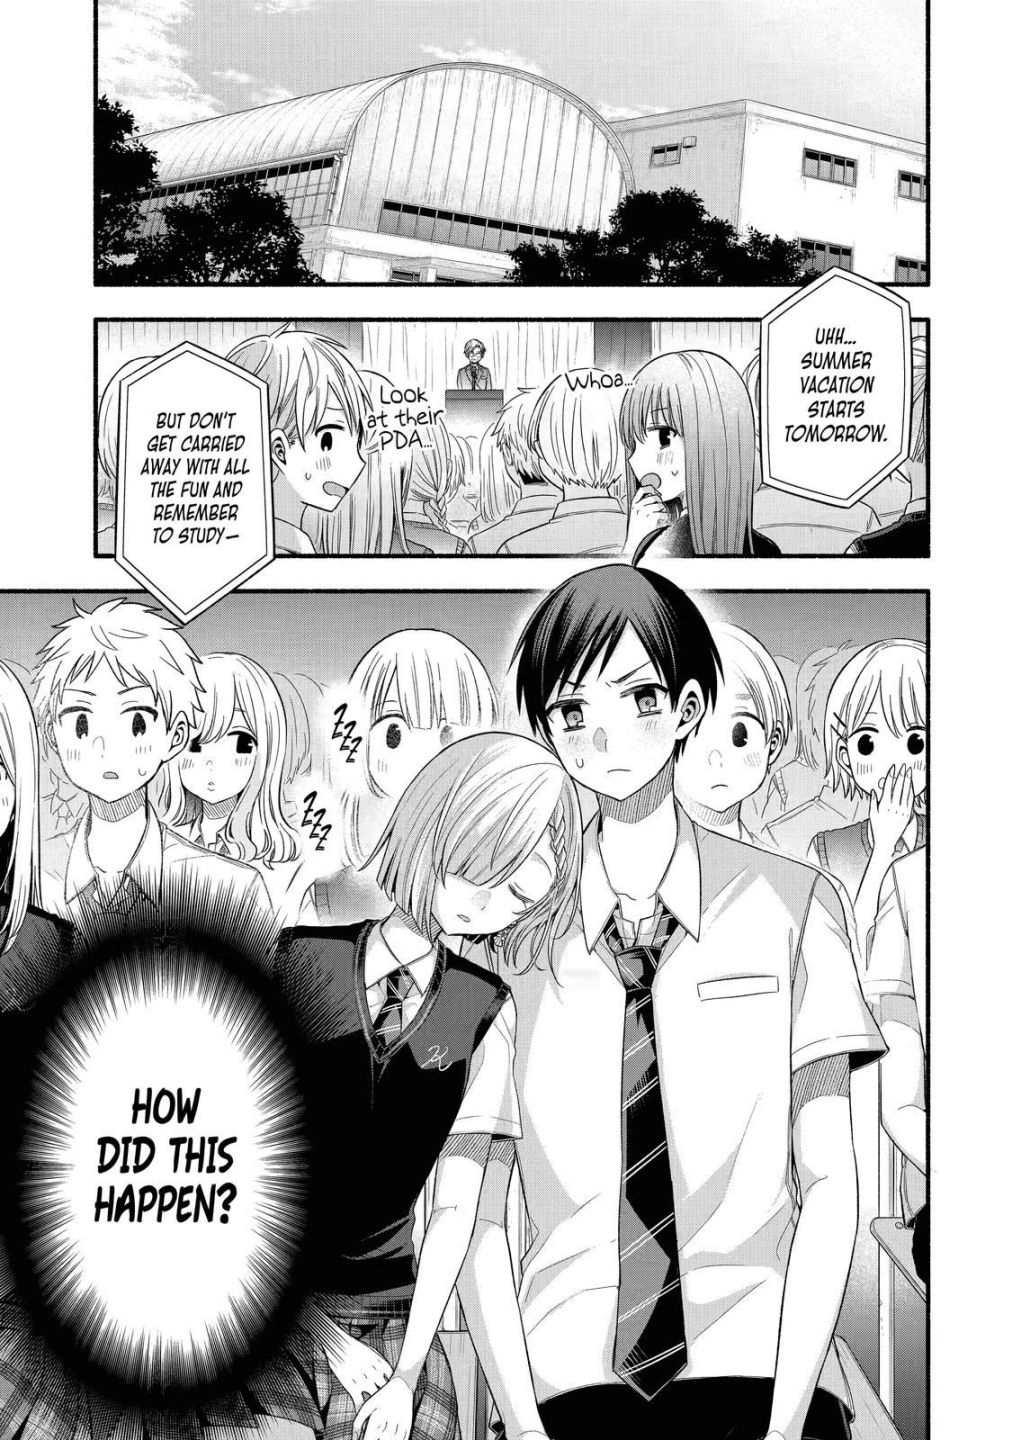 My Friend's Little Sister Is Only Annoying to Me - chapter 24 - #1